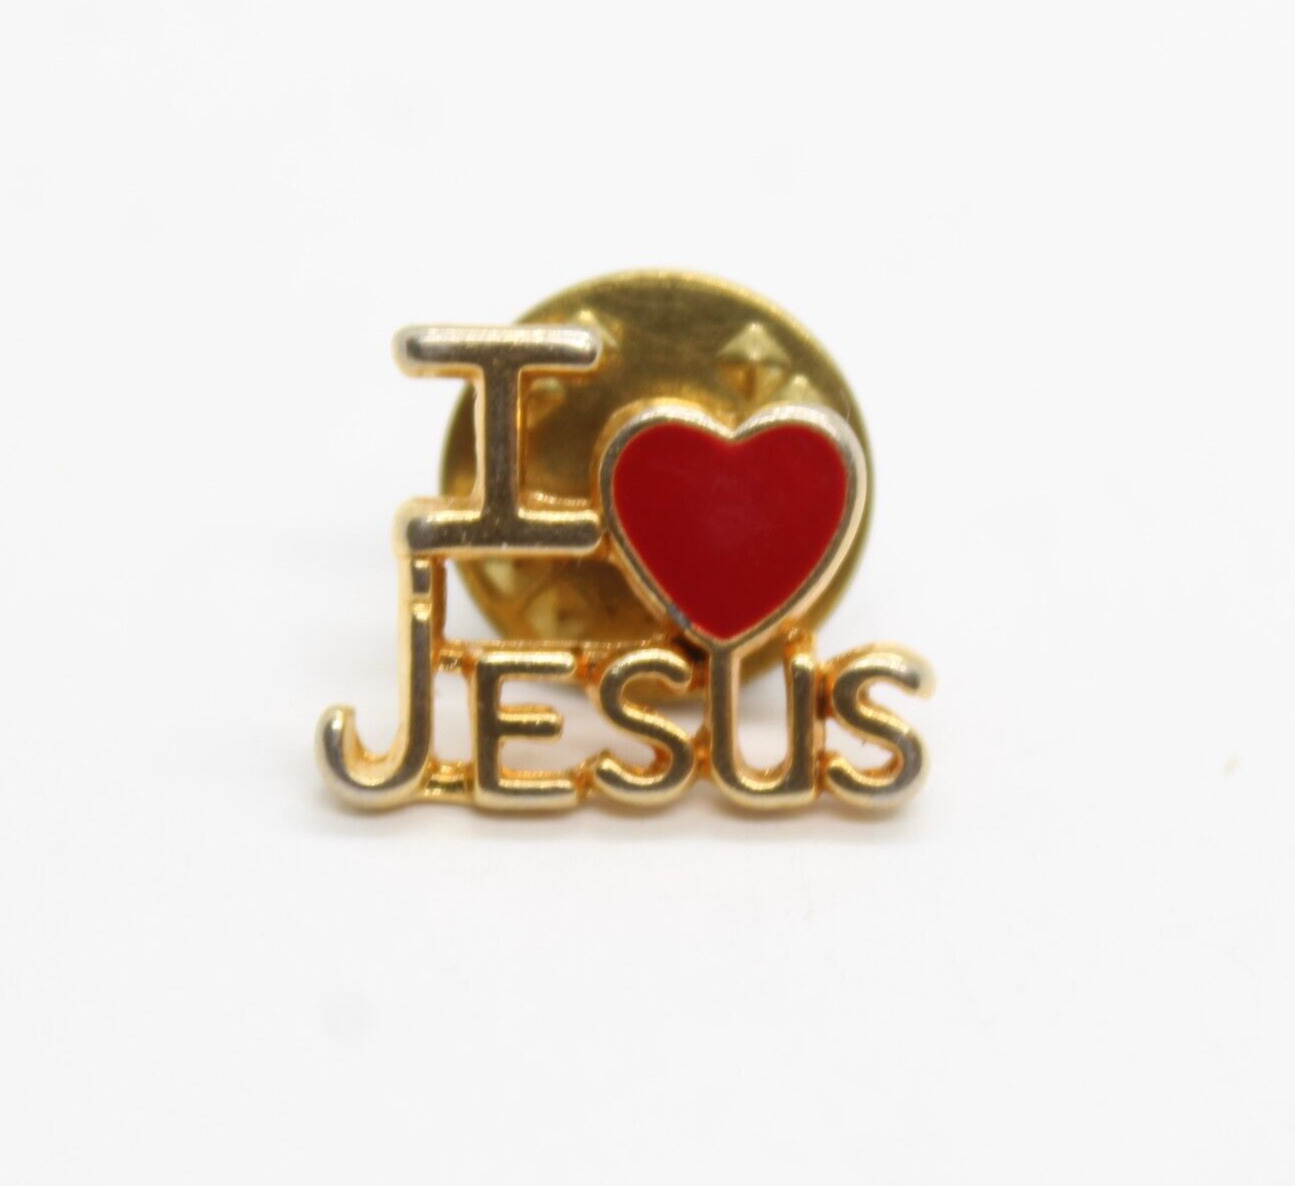 I Love Jesus Pin Gold Tone Lapel Enamel Collectible Religious Red Heart